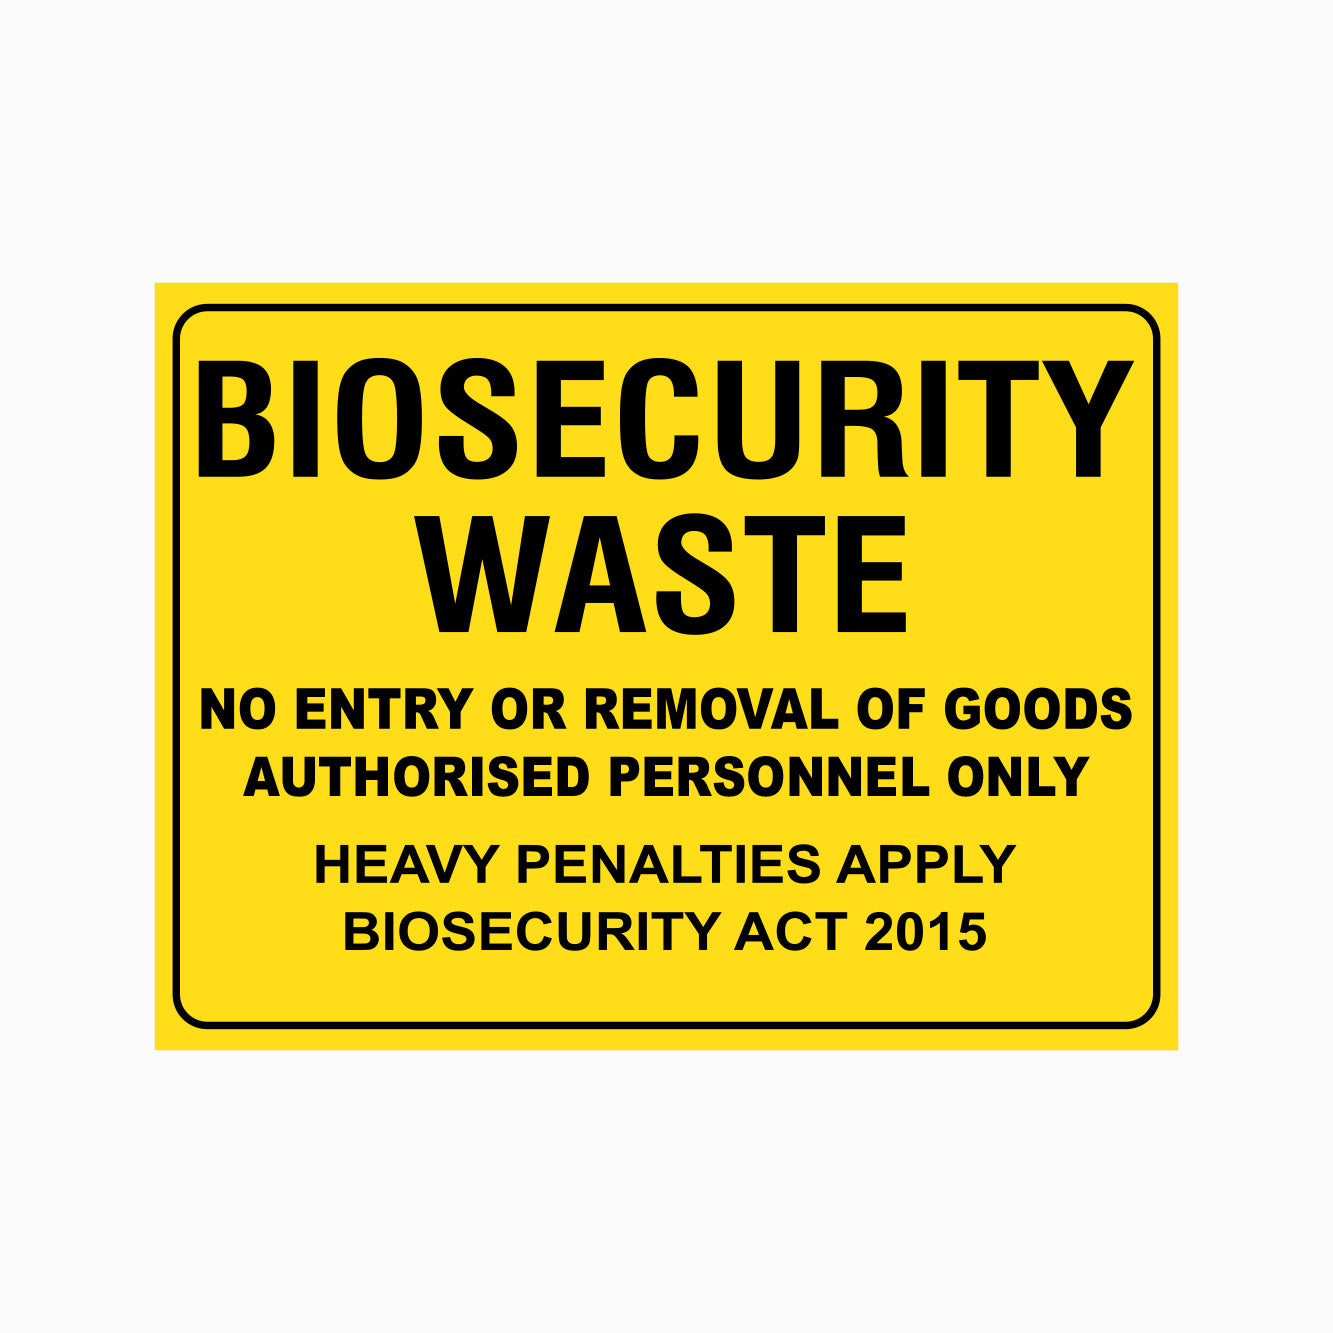 BIOSECURITY WASTE SIGN NO ENTRY OR REMOVAL OF GOODS AUTHORISED PERSONNEL ONLY SIGN HEAVY PENALTIES APPLY BIOSECURITY ACT 2015 SIGN